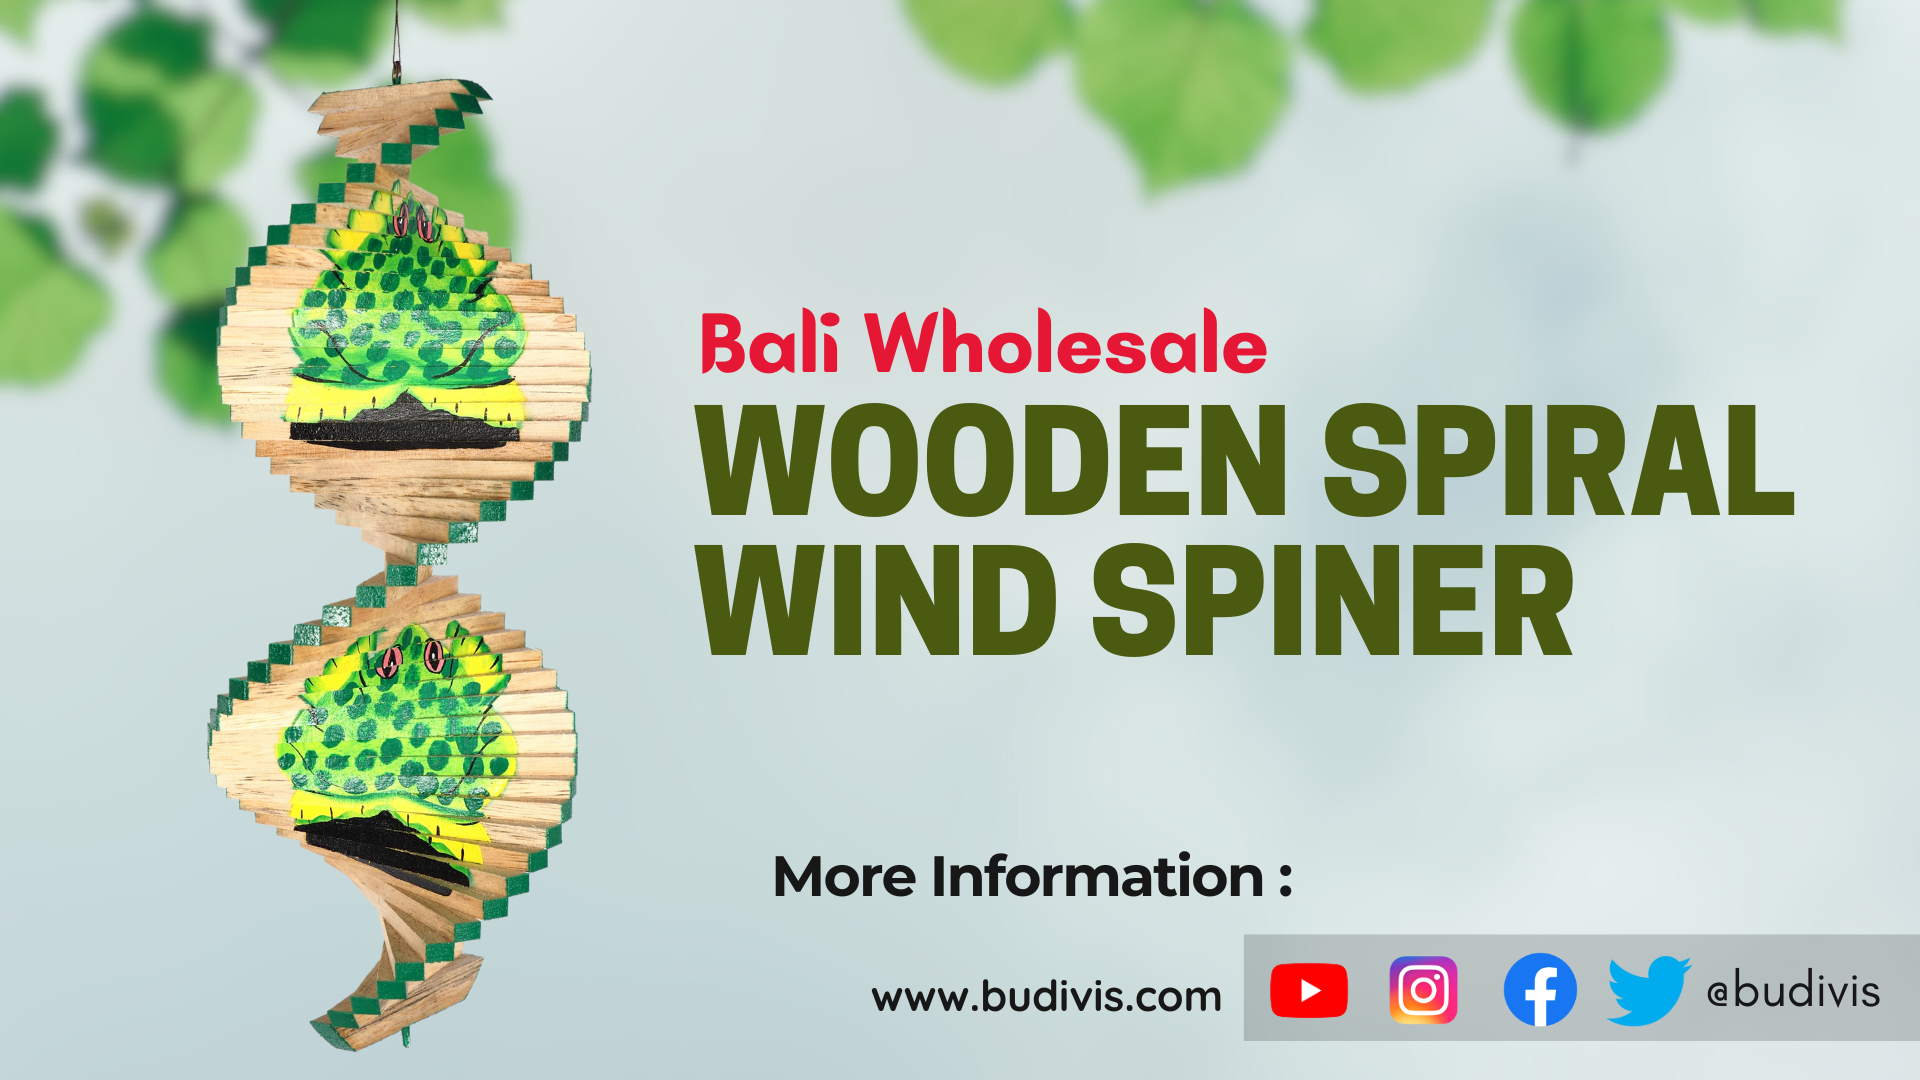 https://www.budivis.com/image/cache/catalog/A%20Blog/A%20blog%20pic/new/Wooden%20Spiral%20Wind%20Spinner-1920x1080.png